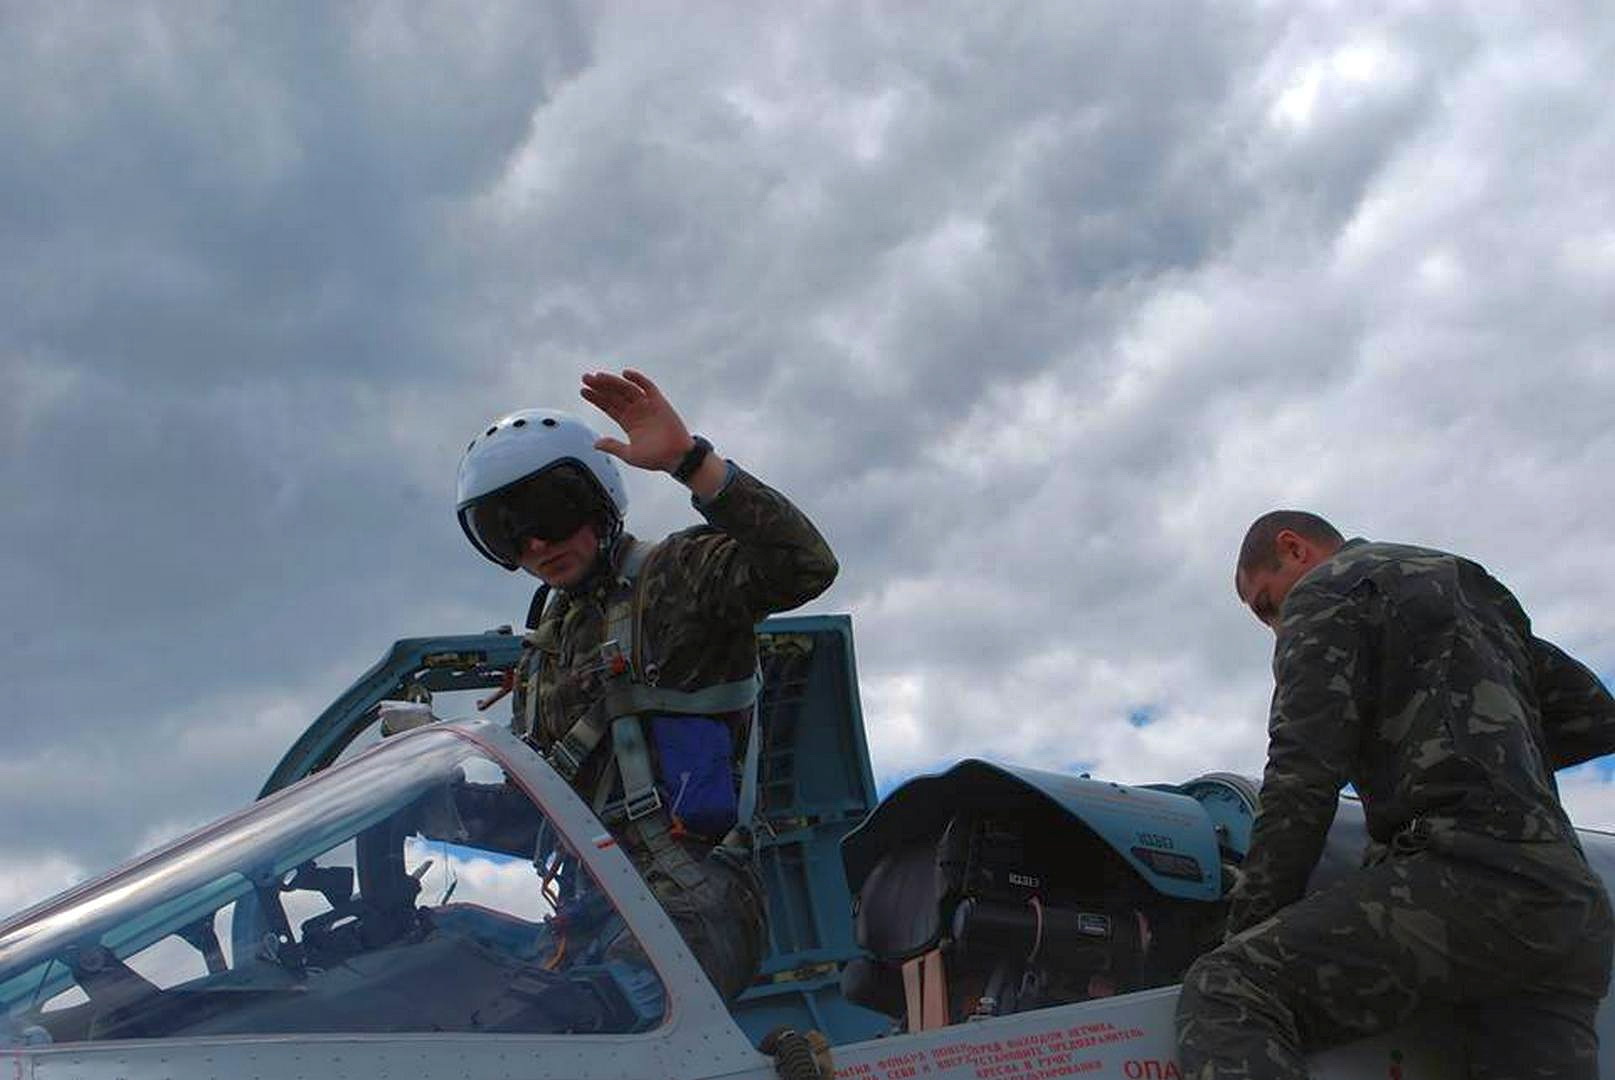 A Ukrainian pilot waves as he prepares for a practice flight during the Clear Sky international drills near the Ivano-Frankivsk airbase on Oct. 14, 2015